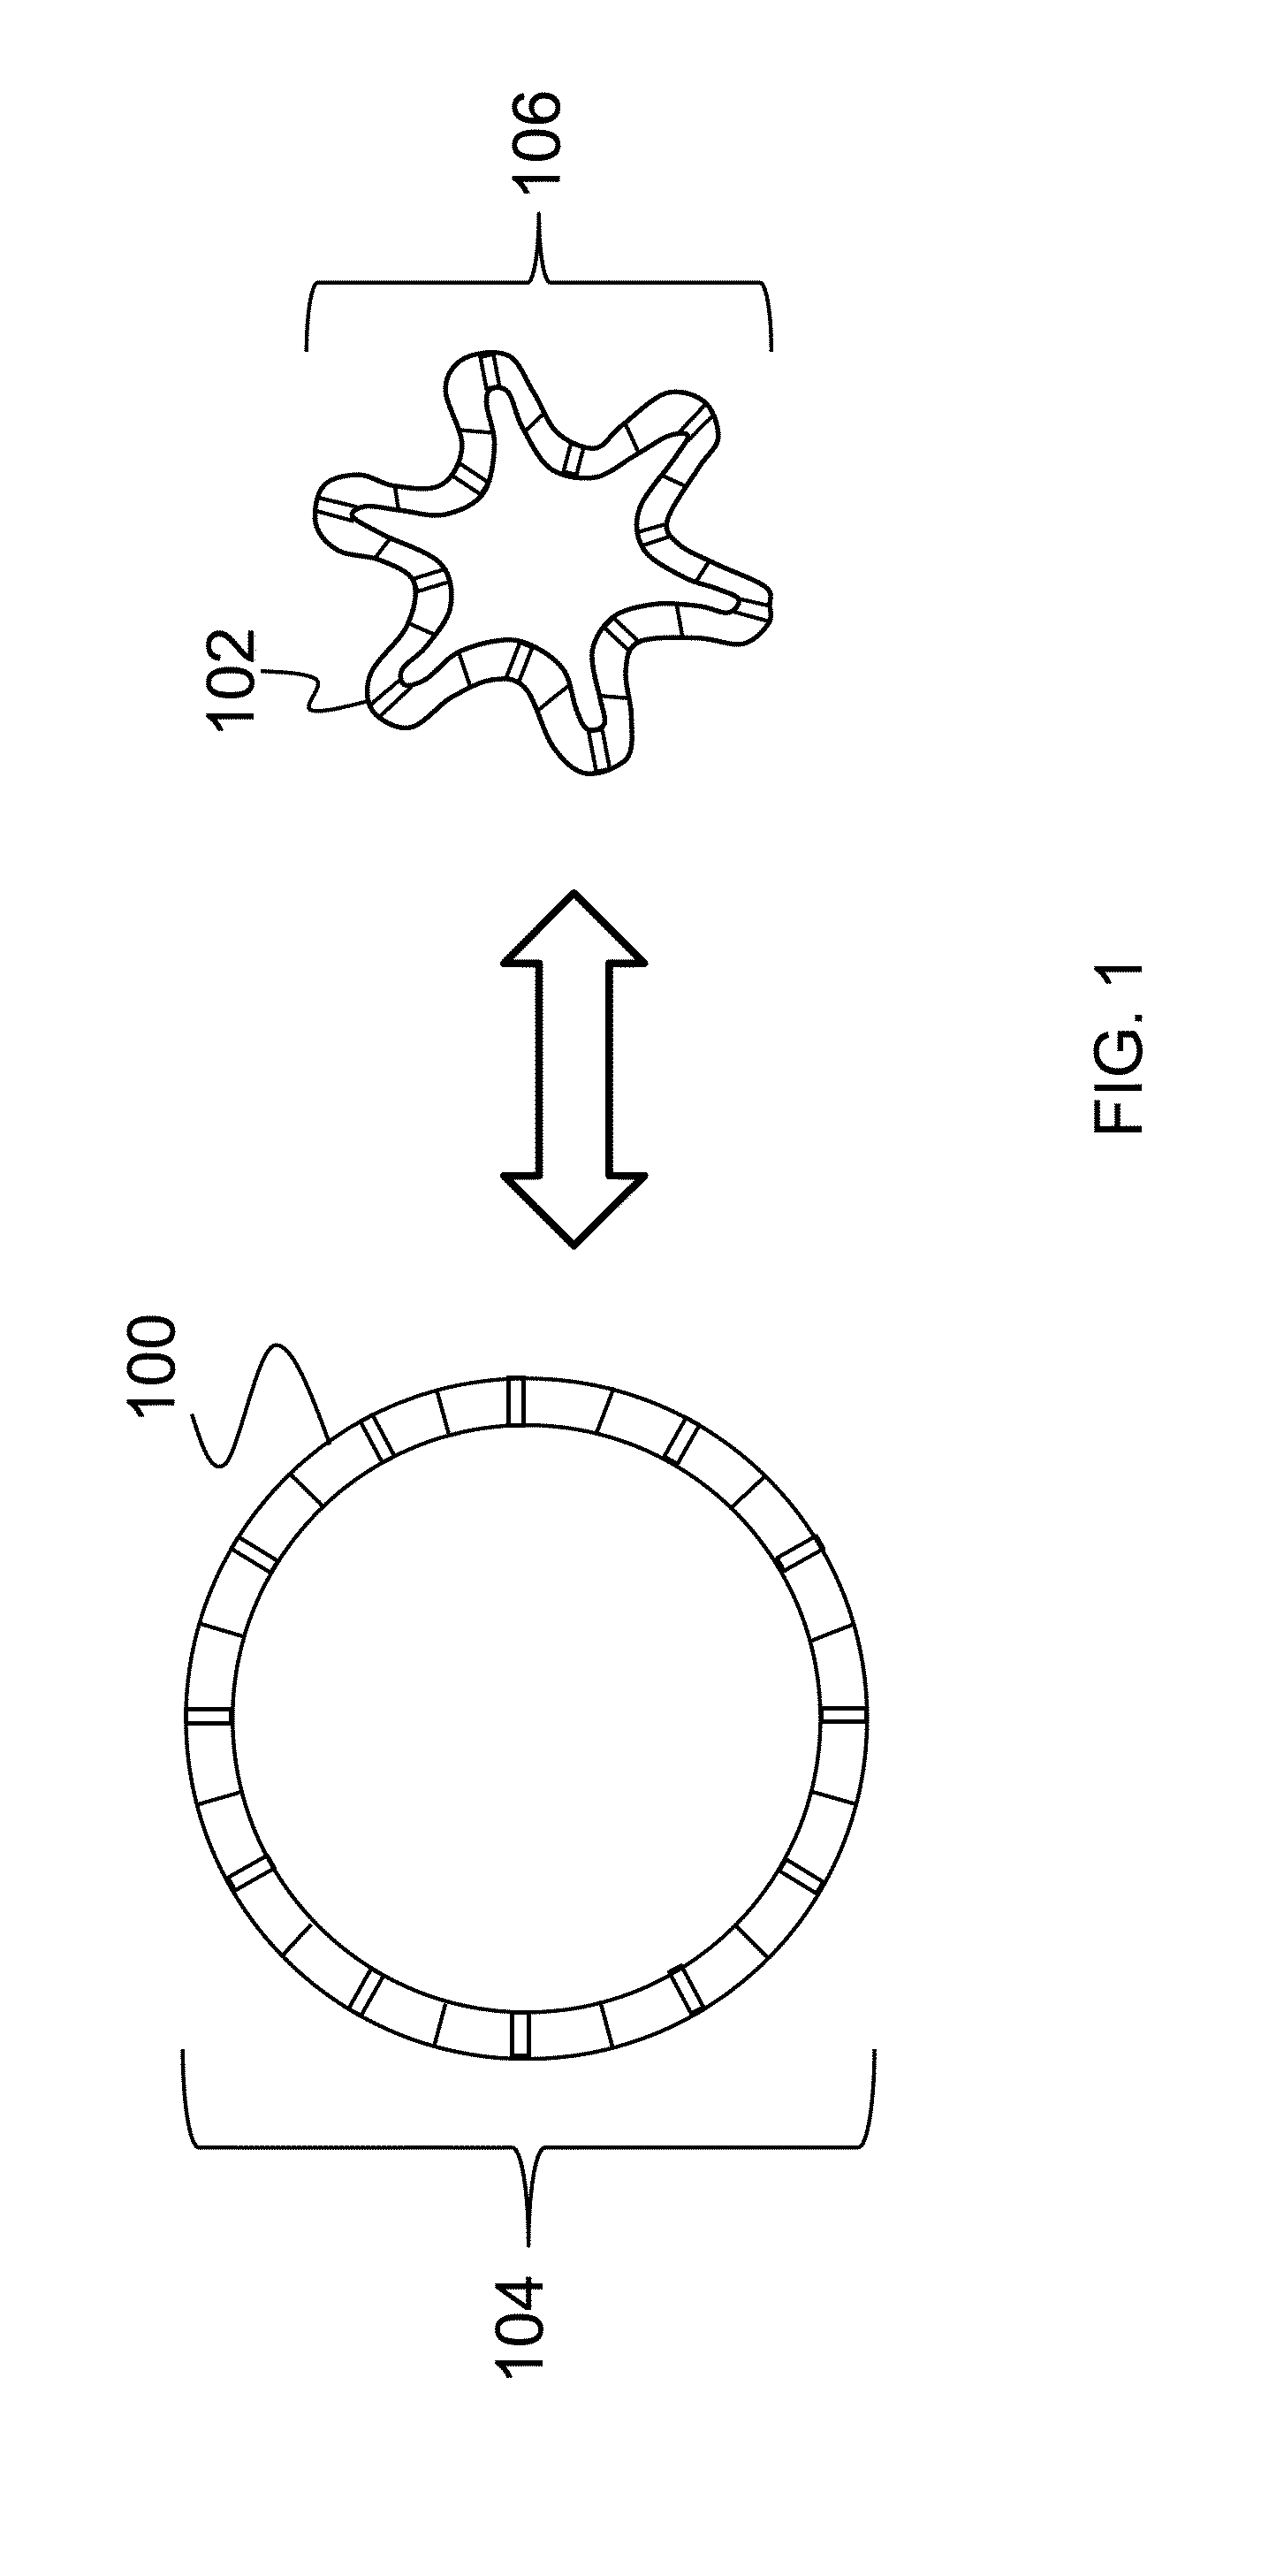 Expandable stent that collapses into a non-convex shape and expands into an expanded, convex shape